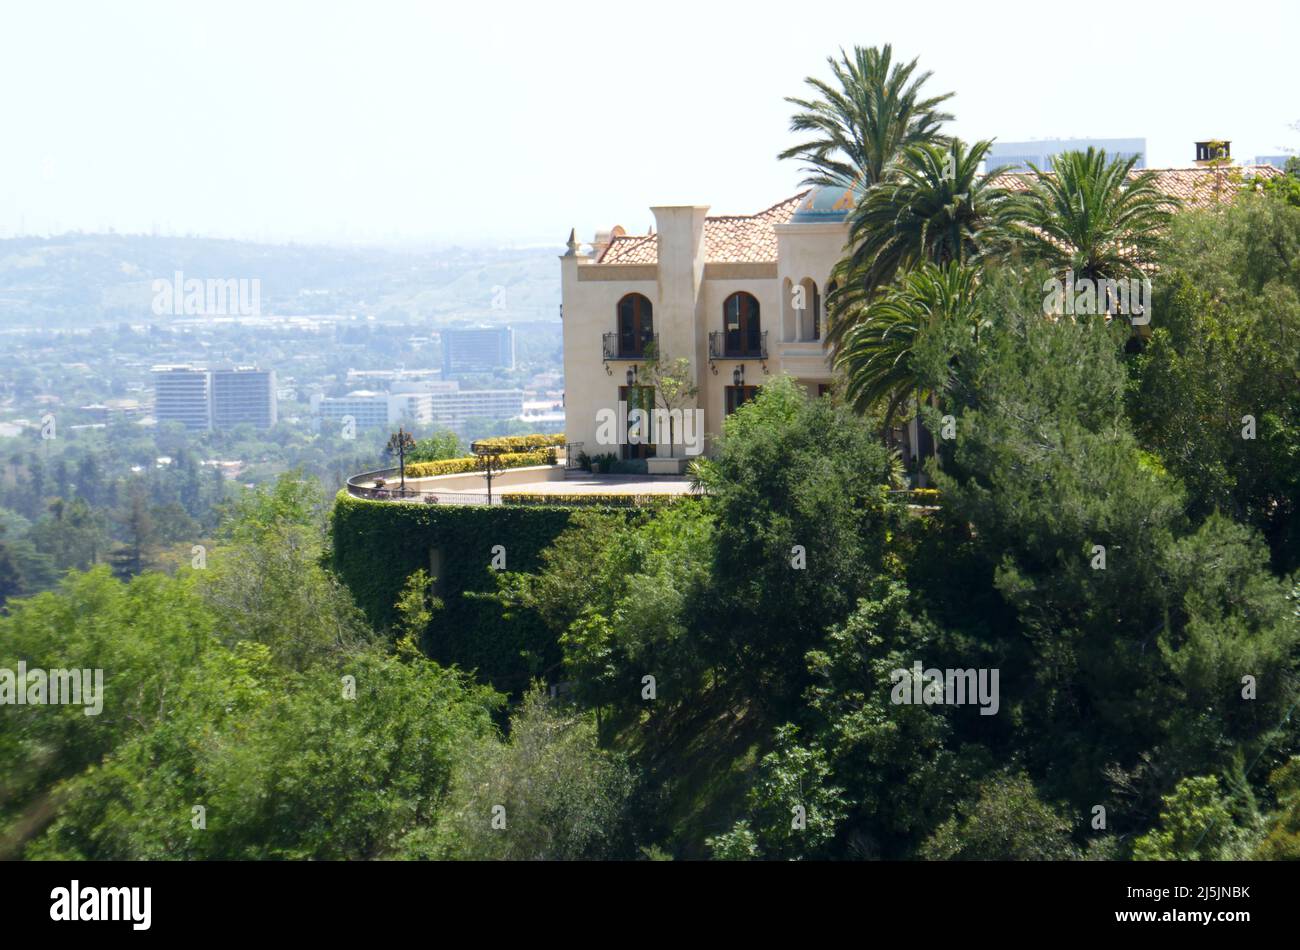 Beverly Hills, California, USA 17th April 2022 A general view of atmosphere of Former Sharon Tate House where Manson Family Murders occurred previously at 10050 Cielo Drive, now 10066 Cielo Drive on April 17, 2022 in Beverly Hills, California, USA. Photo by Barry King/Alamy Stock Photo Stock Photo